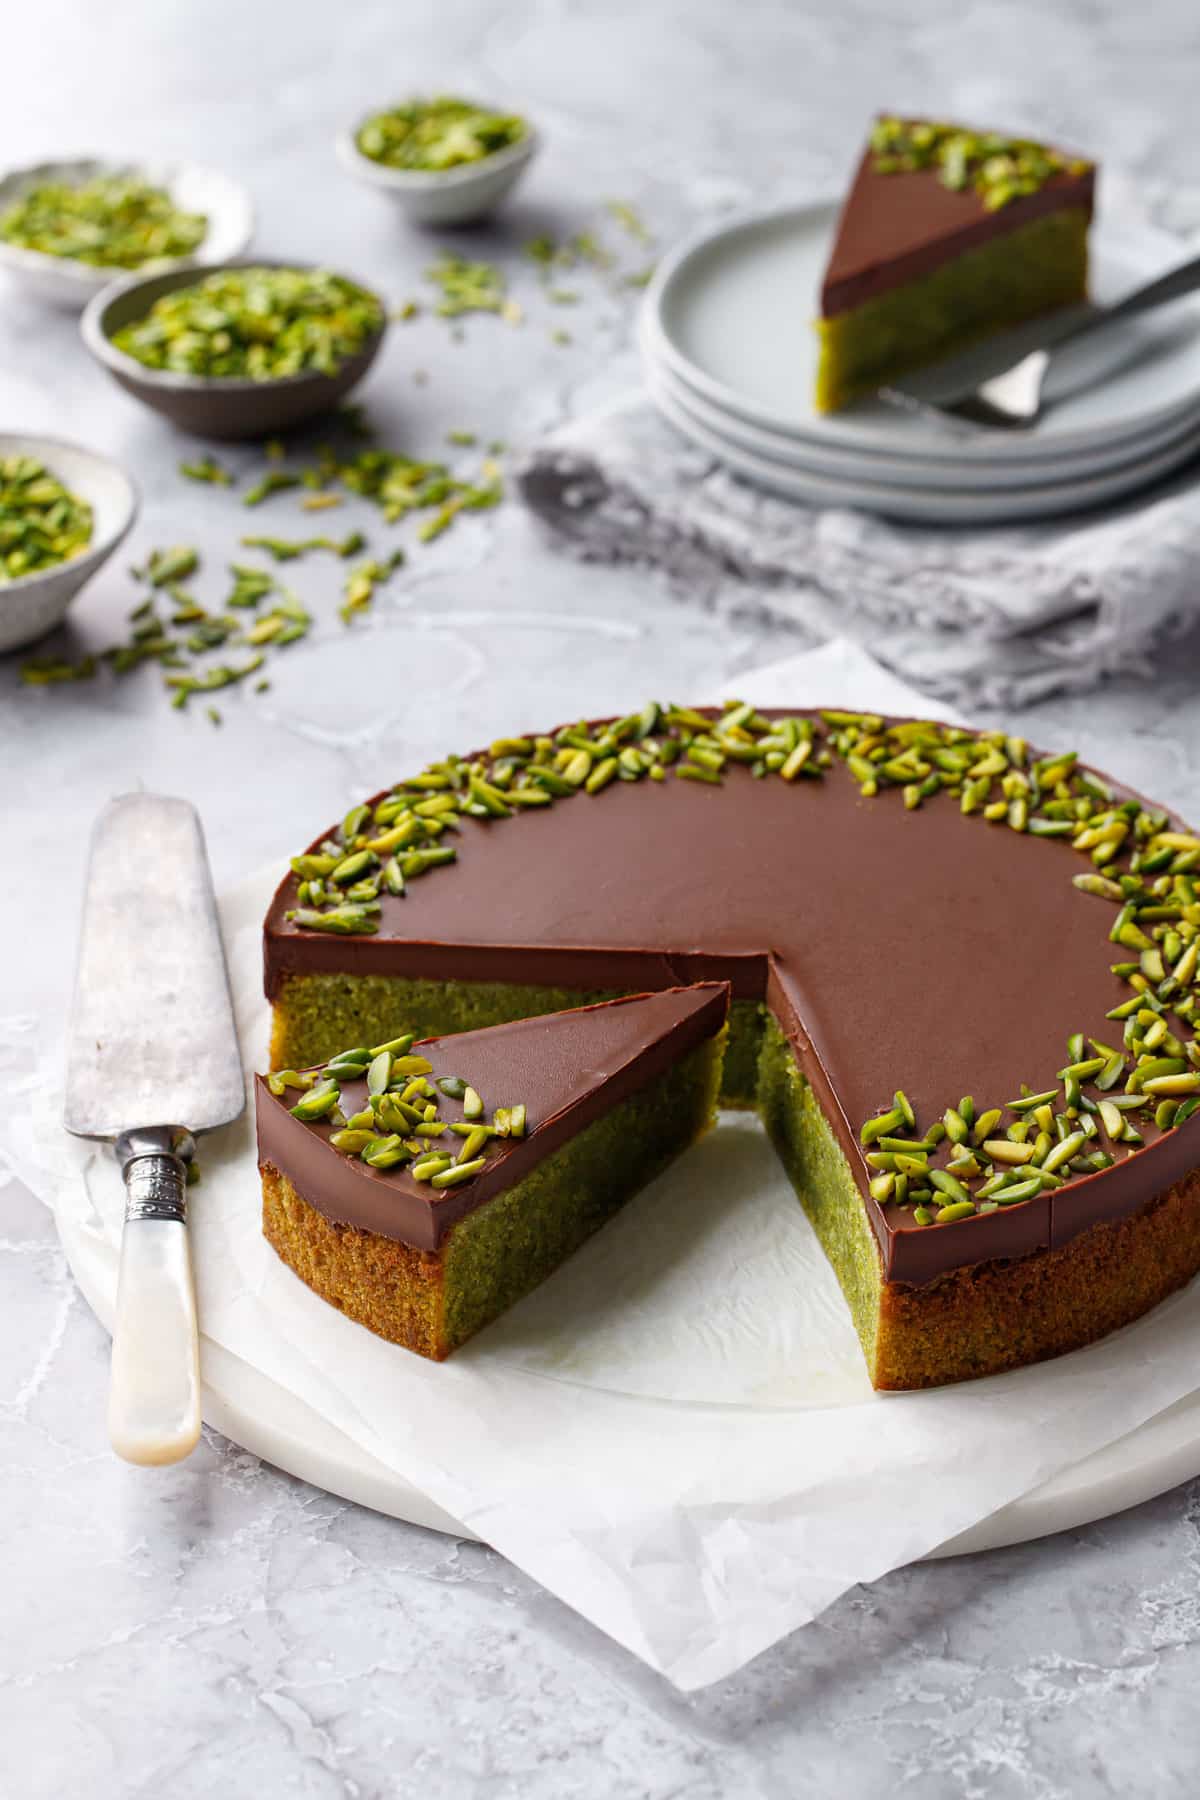 Flourless Pistachio Cake with Chocolate Ganache and topped with slivered pistachios, on a gray background with cake server, cut slice and more pistachios in the background.